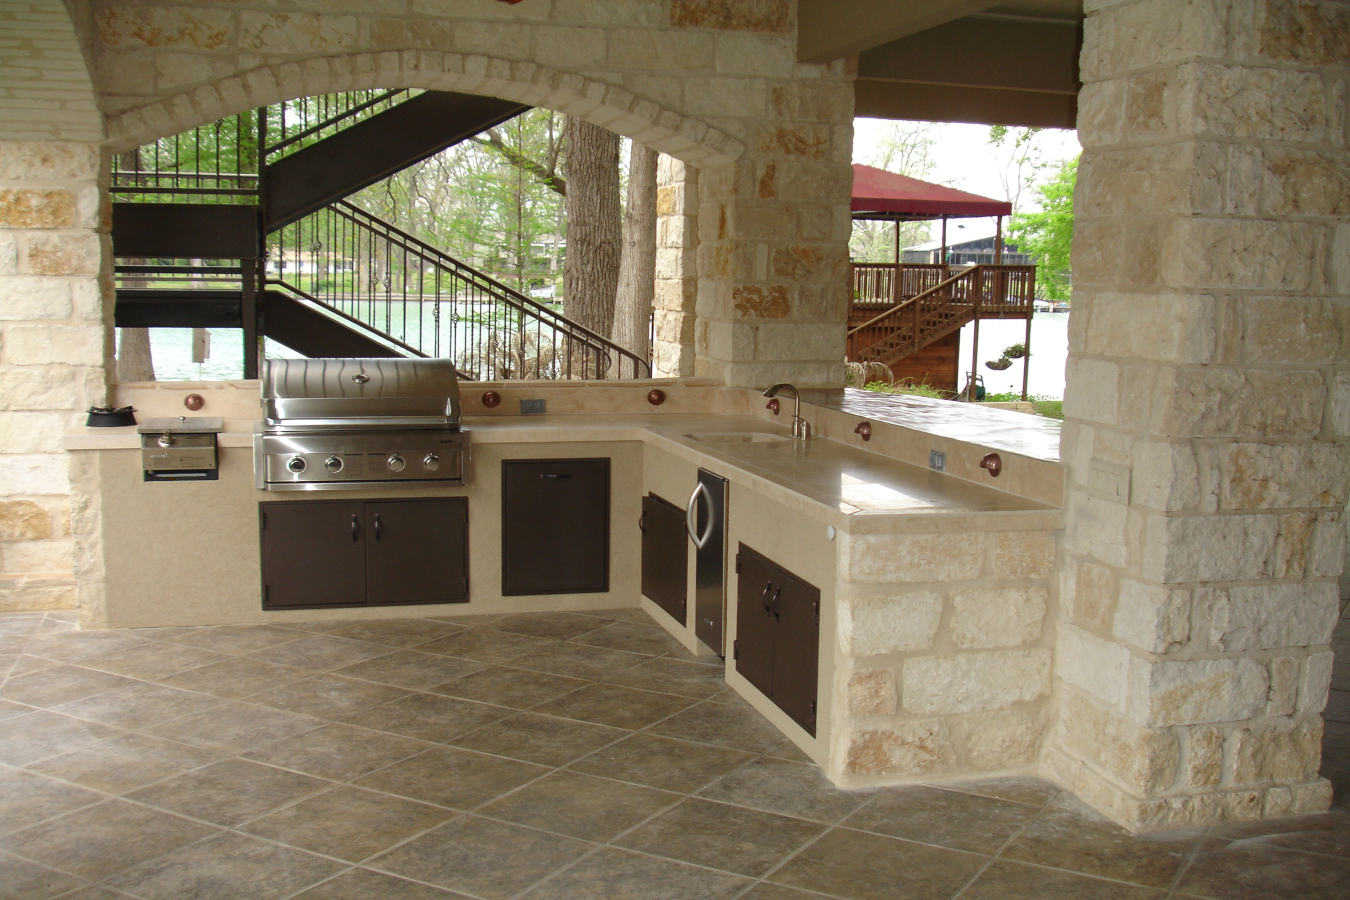 Outdoor custom kitchen built by Chicago masonry contractor using stone